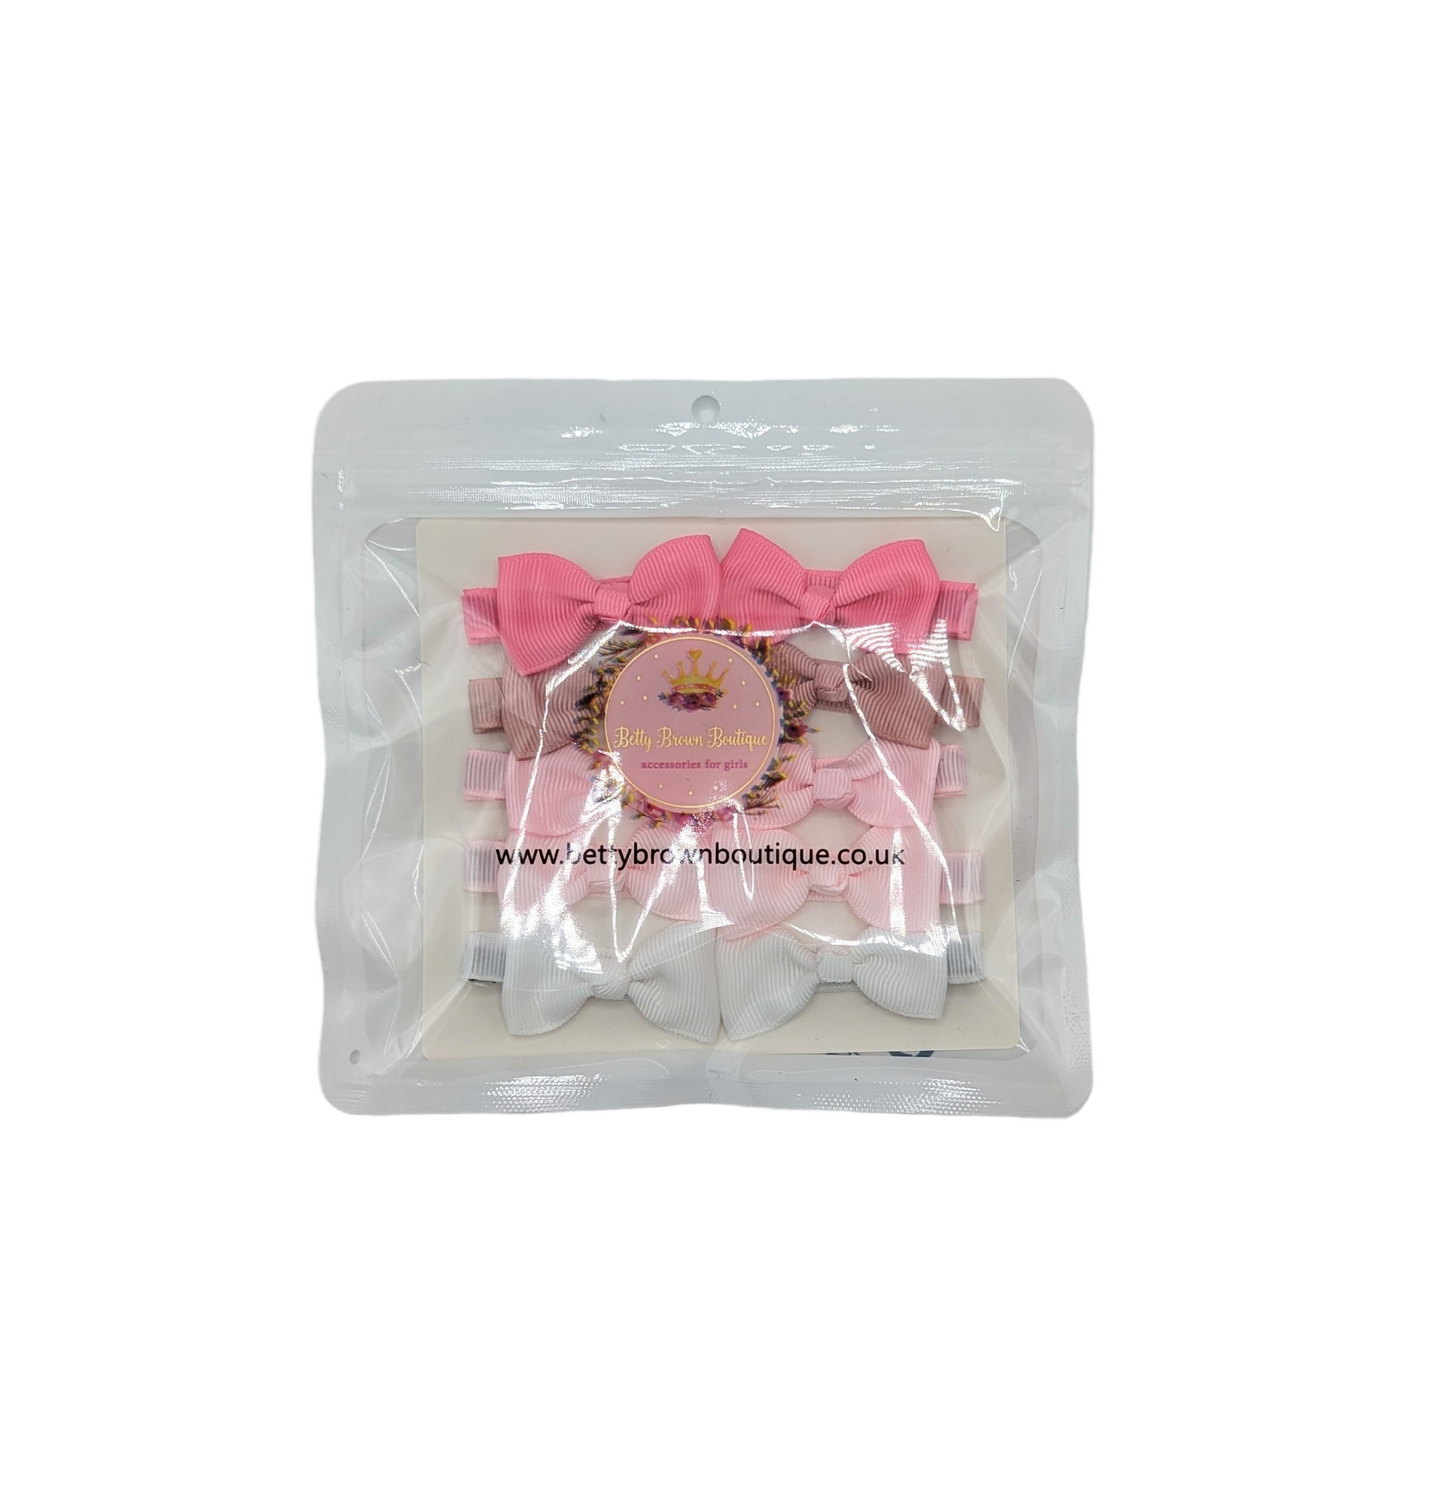 Pinks Pack of 10 My First 2 inch Bow Clips - Betty Brown Boutique Ltd